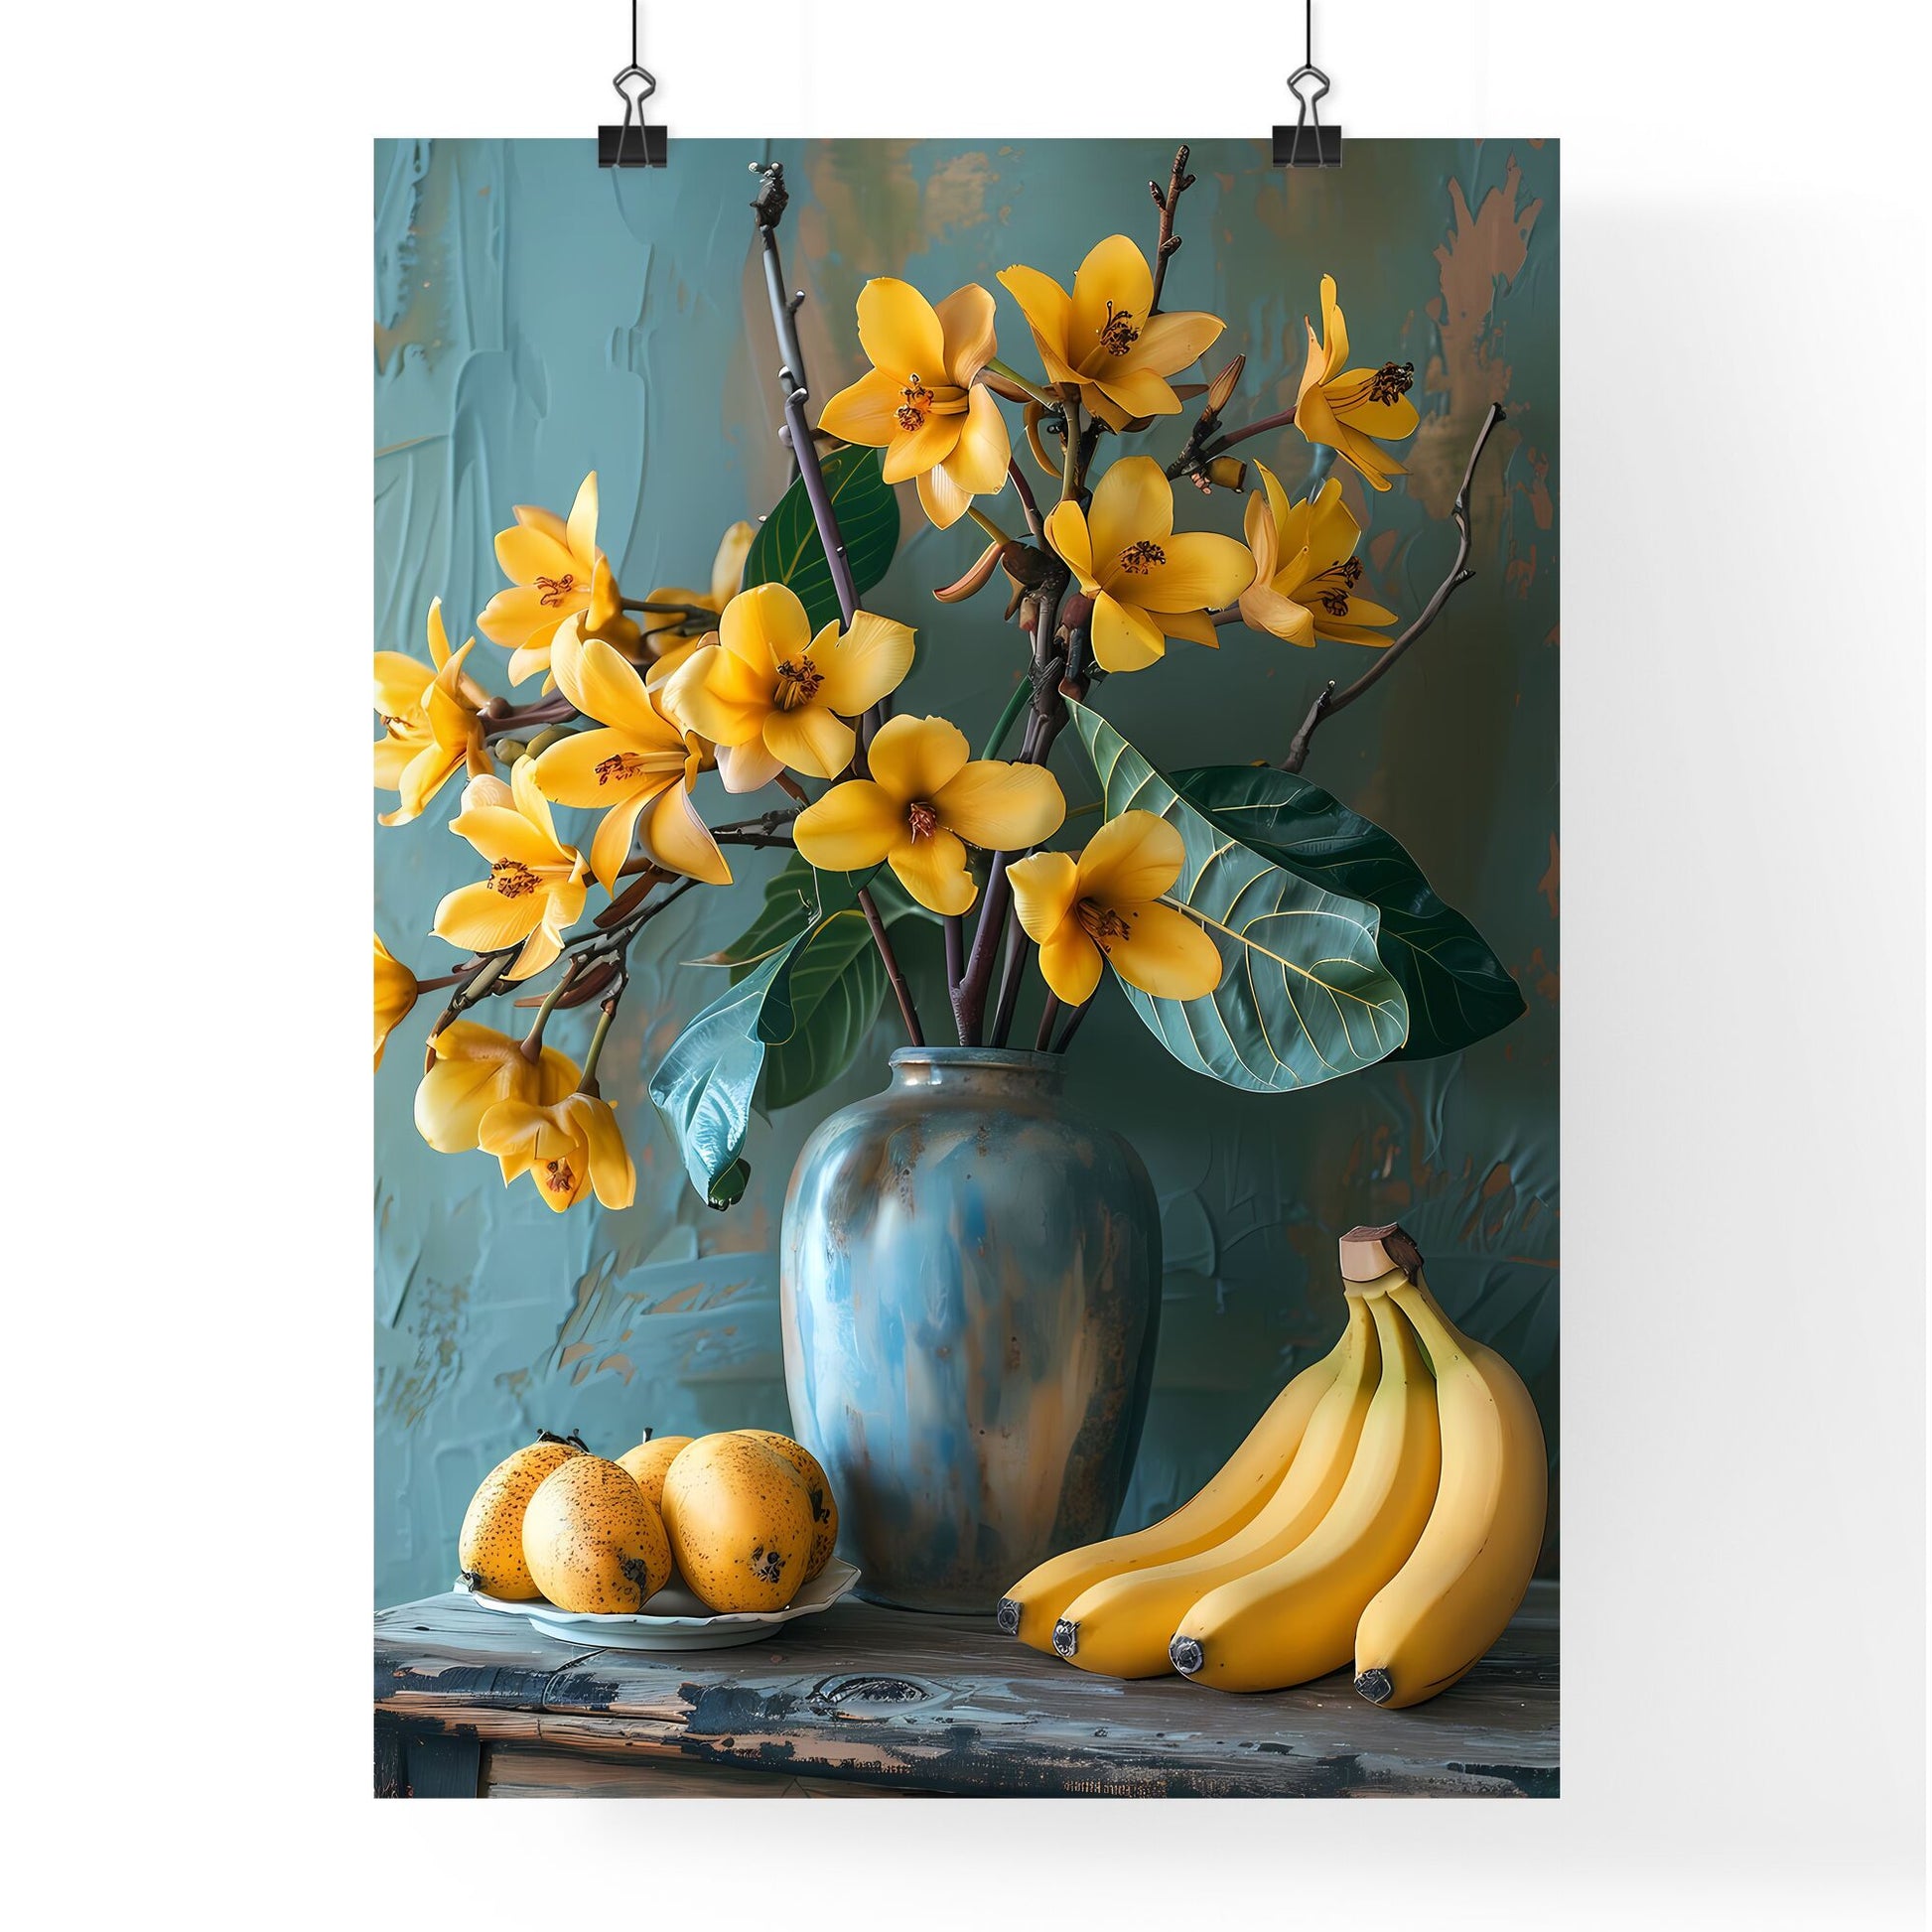 Rustic Still Life: Bananas and Floral Symphony on Patina Wall, a Canvas Masterpiece Default Title